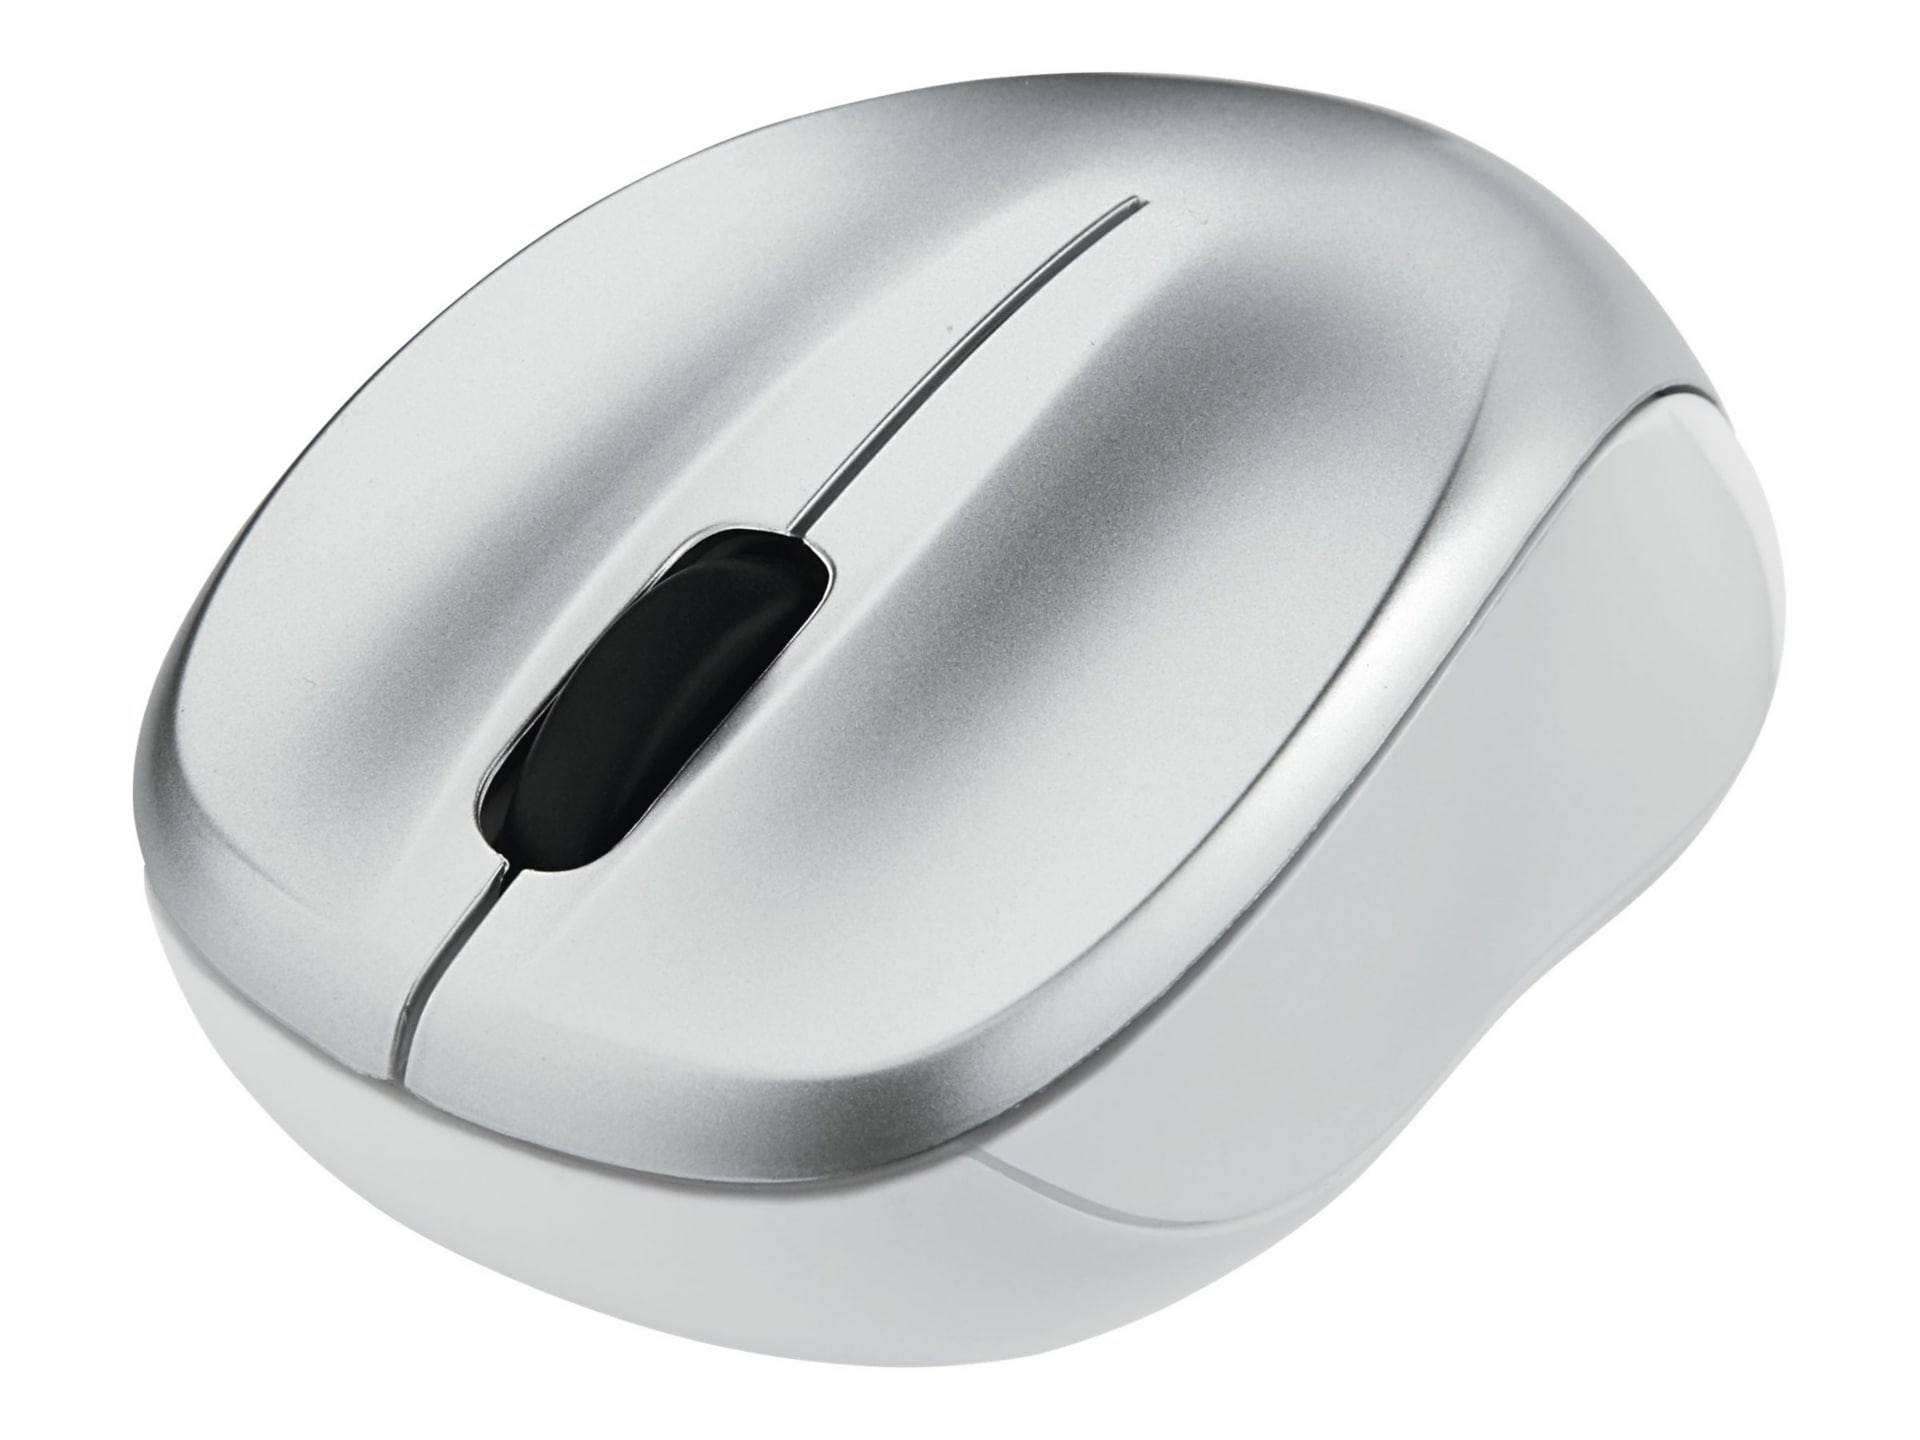 Verbatim Silent Wireless Blue LED Mouse - mouse - 2.4 GHz - silver